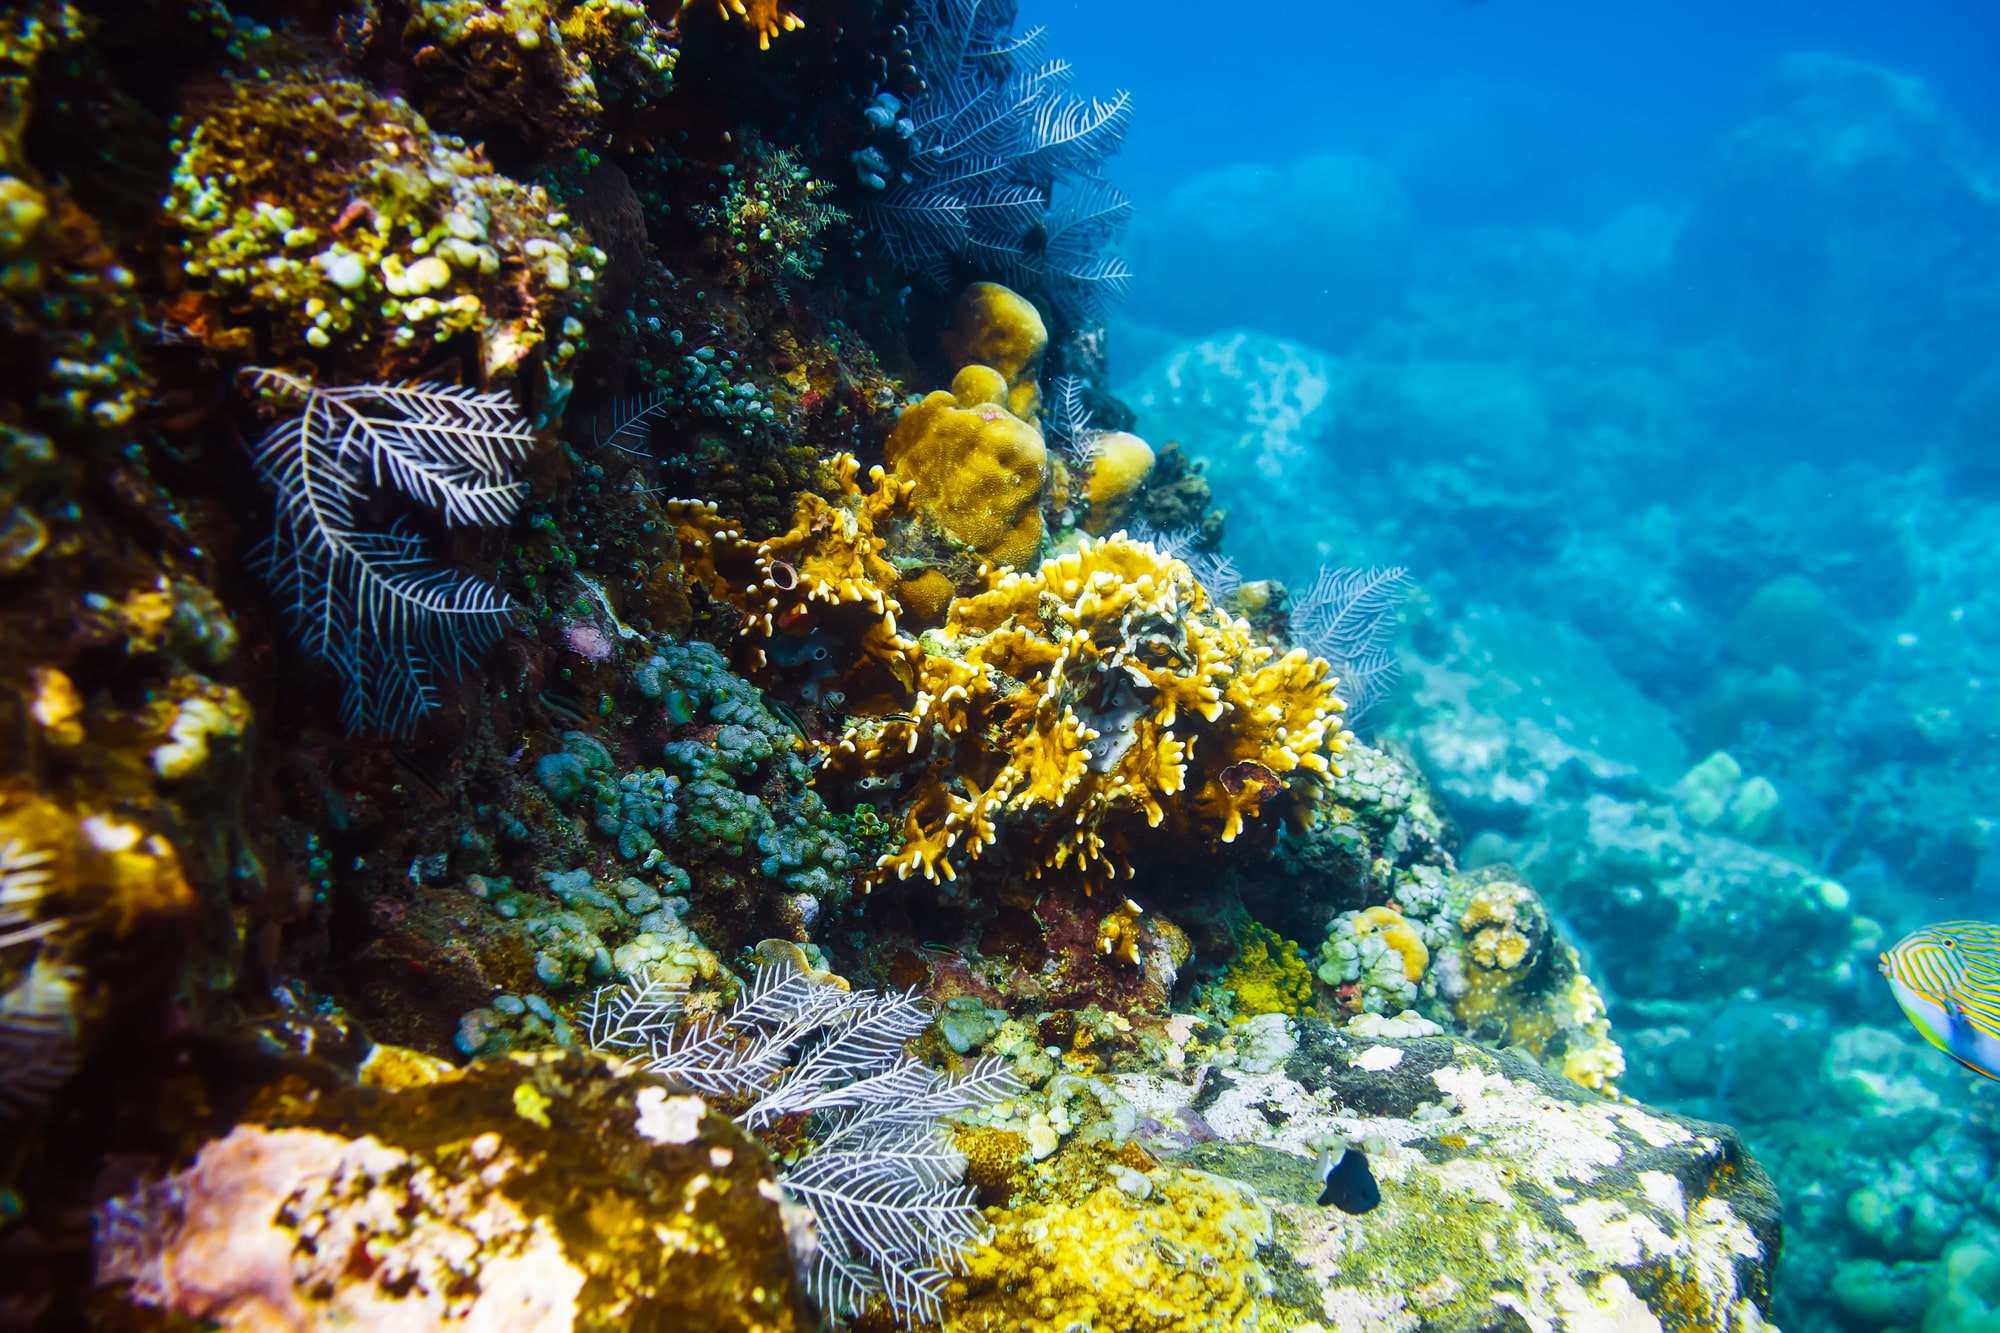 Abu Dhabi has launched the region’s largest coral reef rehabilitation project